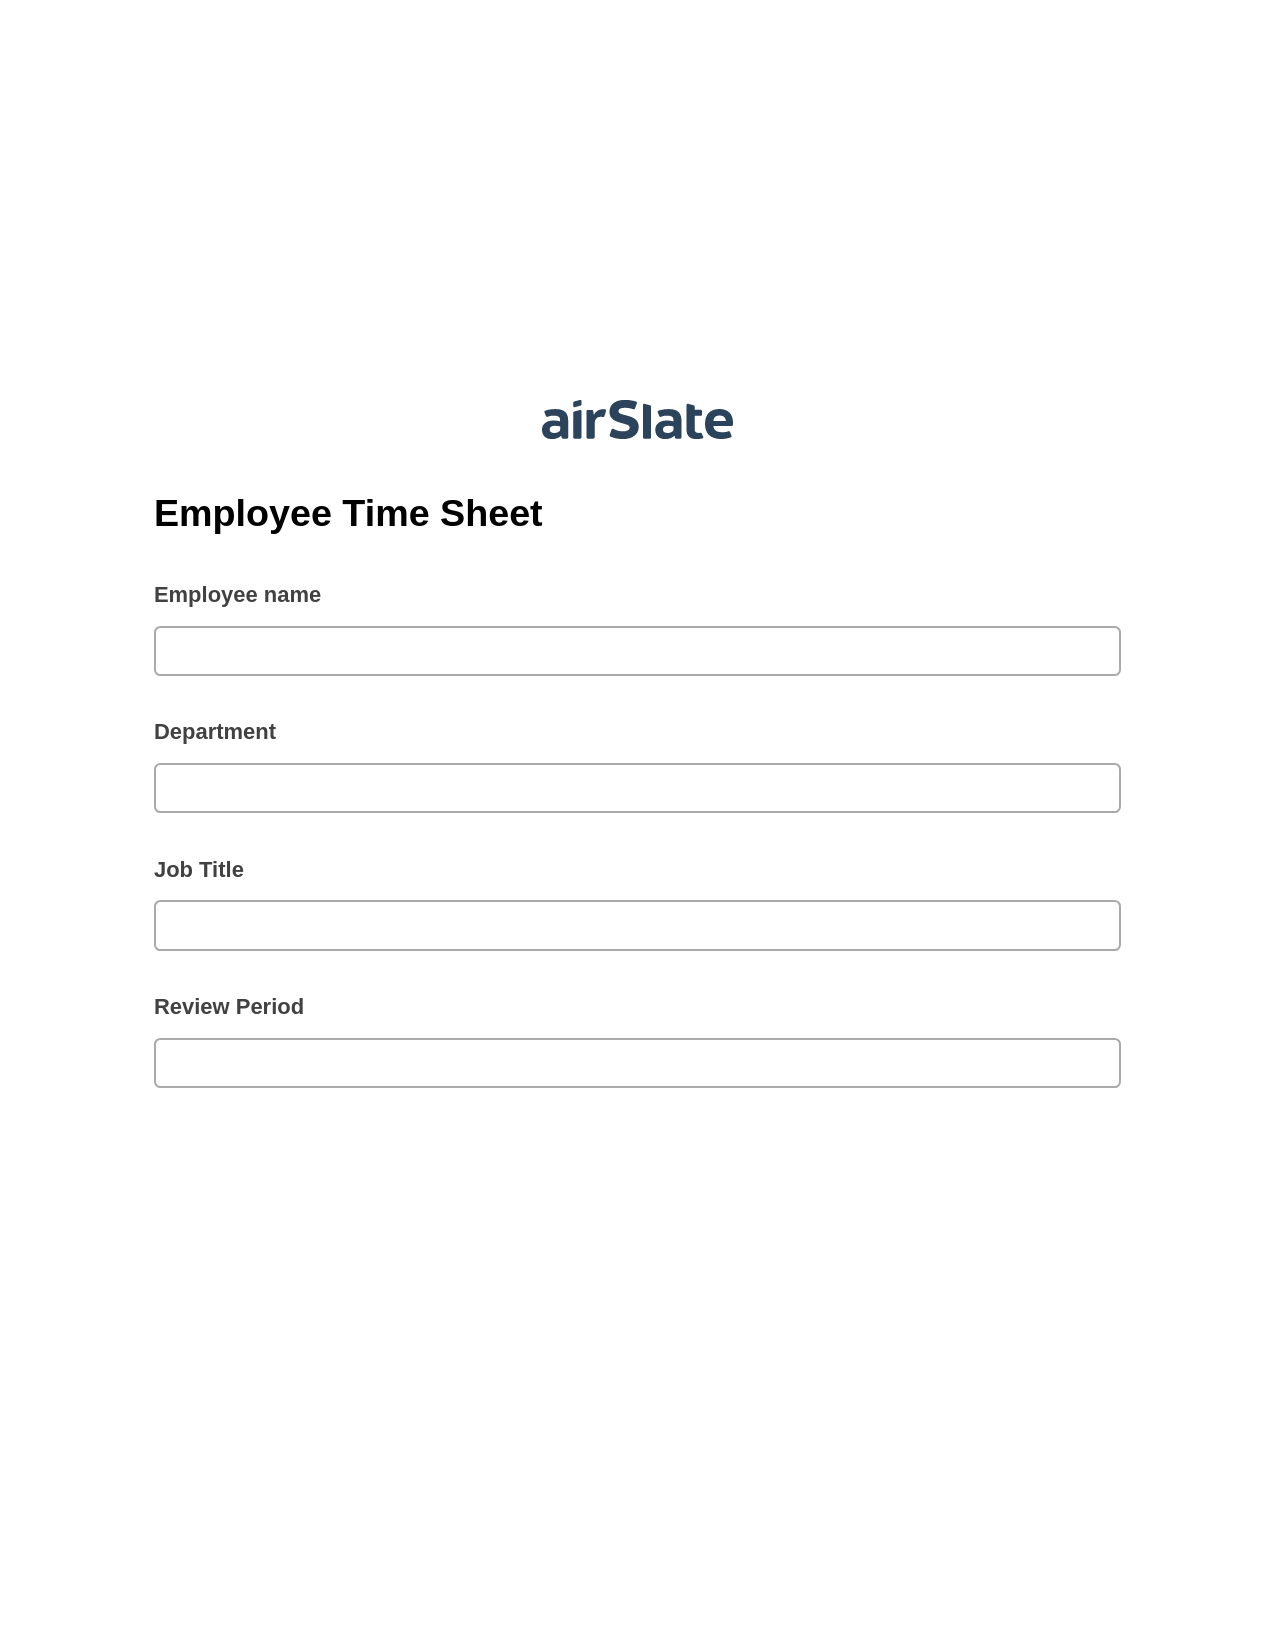 Employee Time Sheet Pre-fill from MS Dynamics 365 Records, Custom Field's Value Bot, Export to MySQL Bot